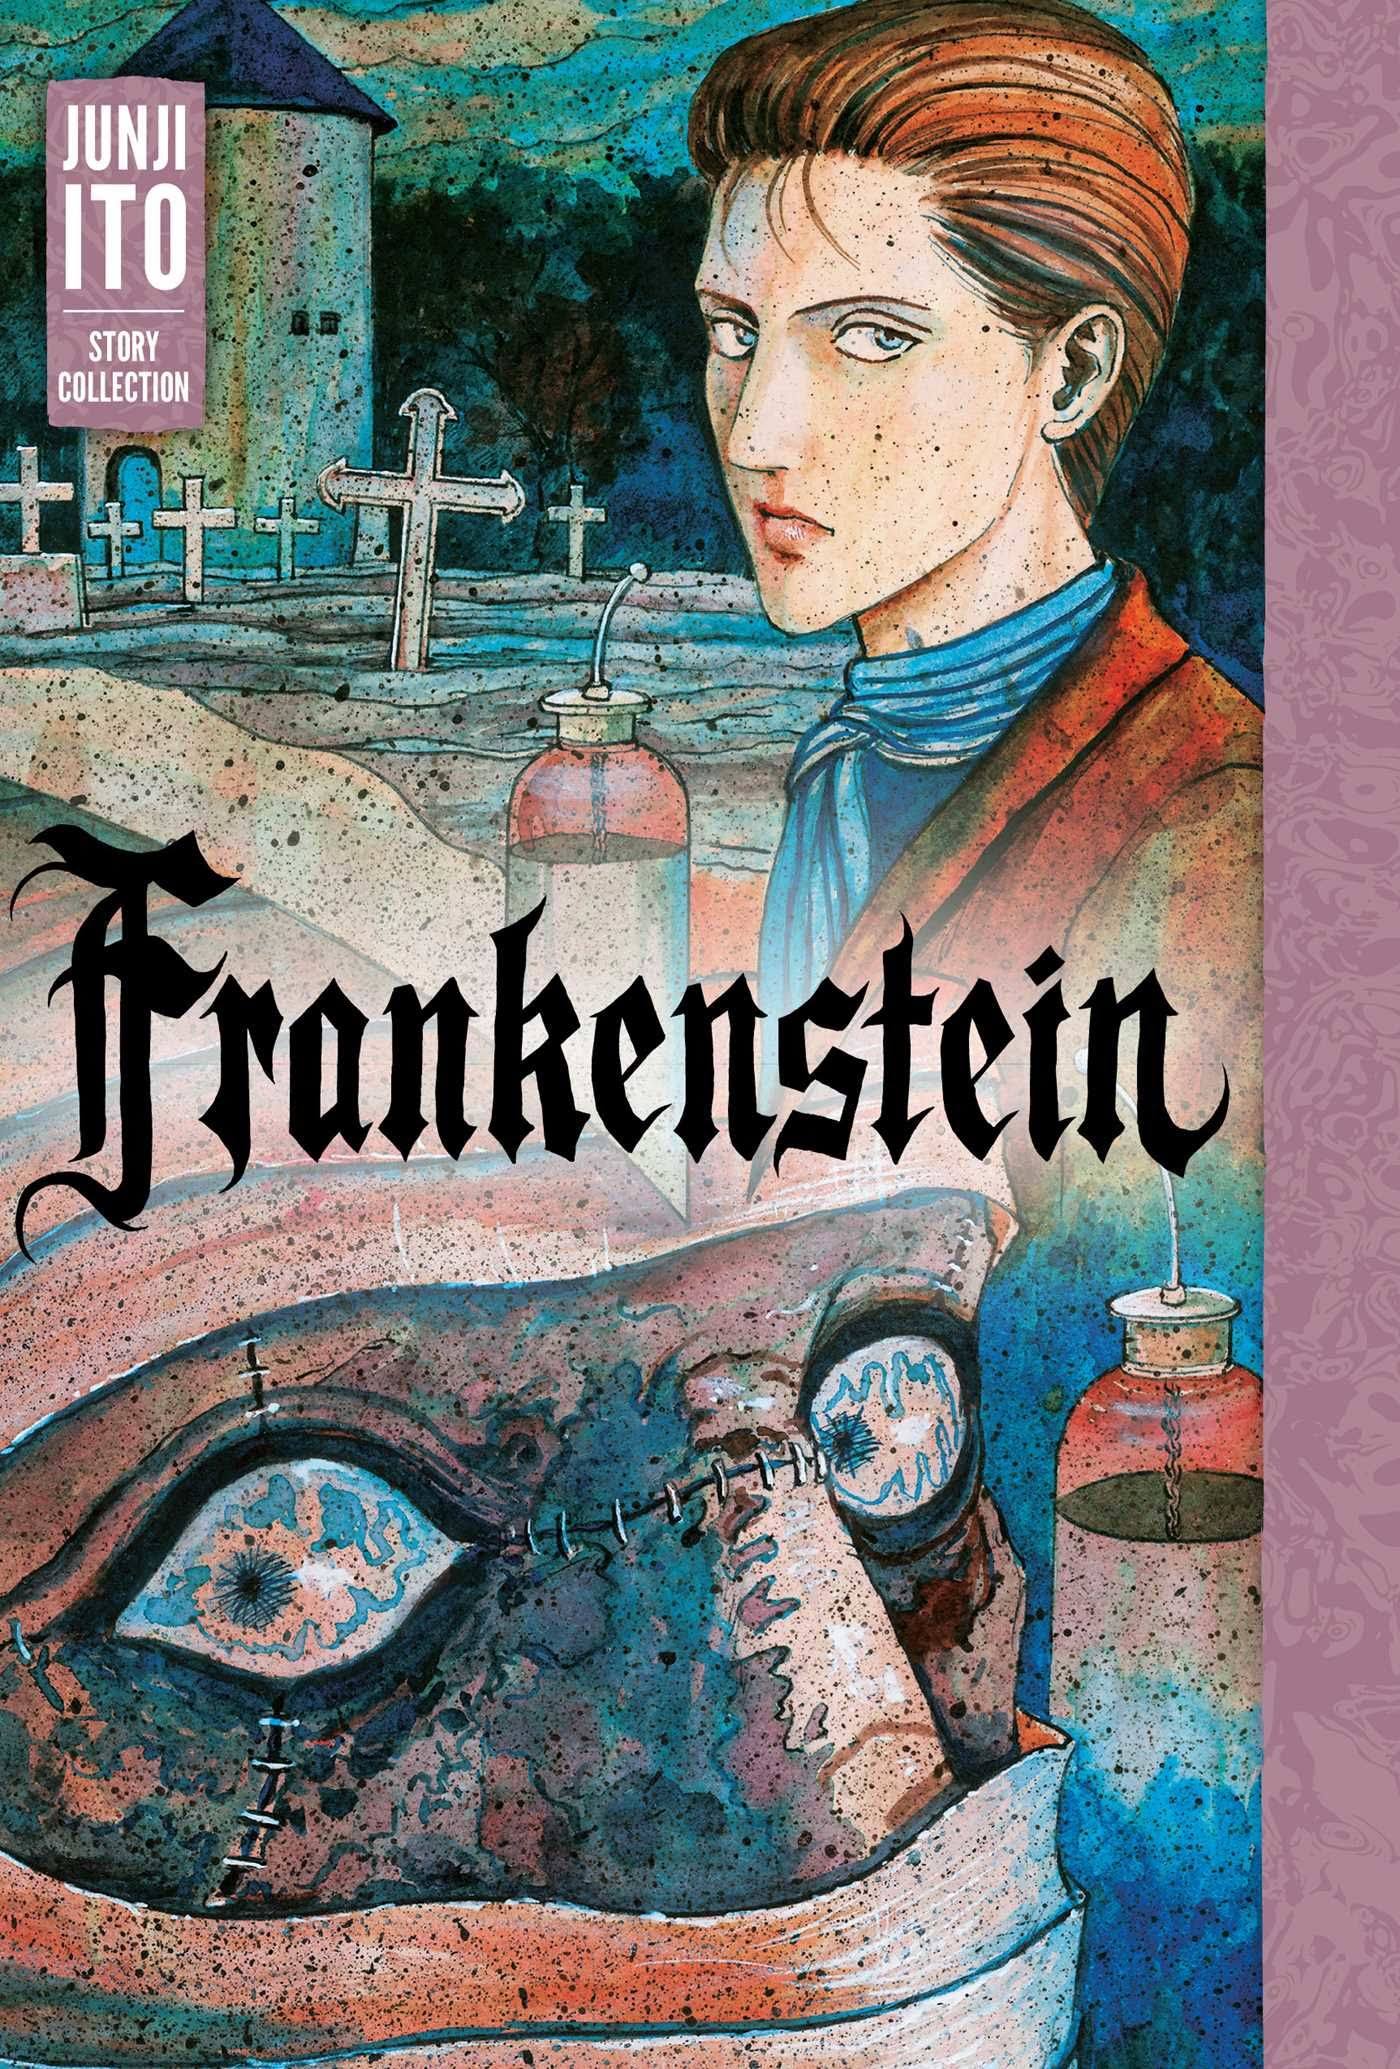 Frankenstein: Junji Ito Story Collection [Book]